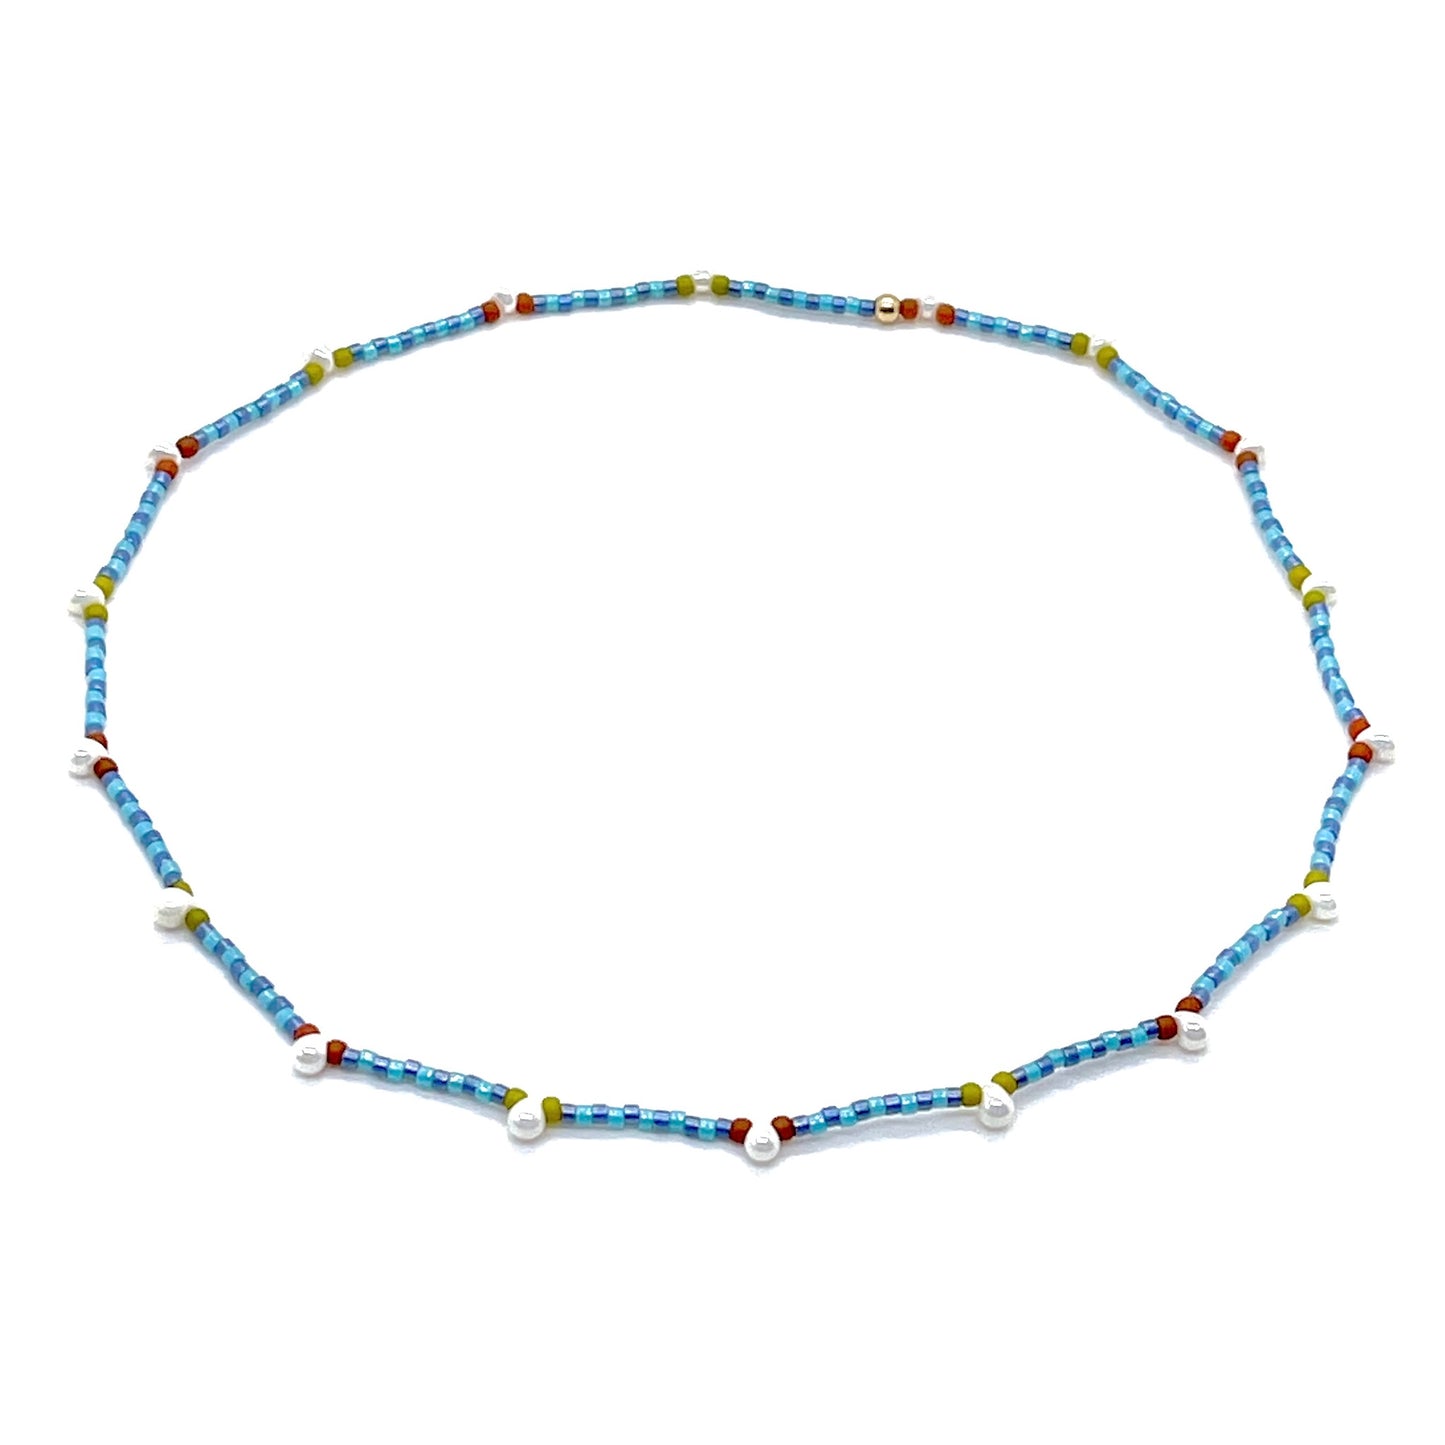 Blue beaded necklace with tiny seed beads and pearl droplets. Handmade on stretch cord.